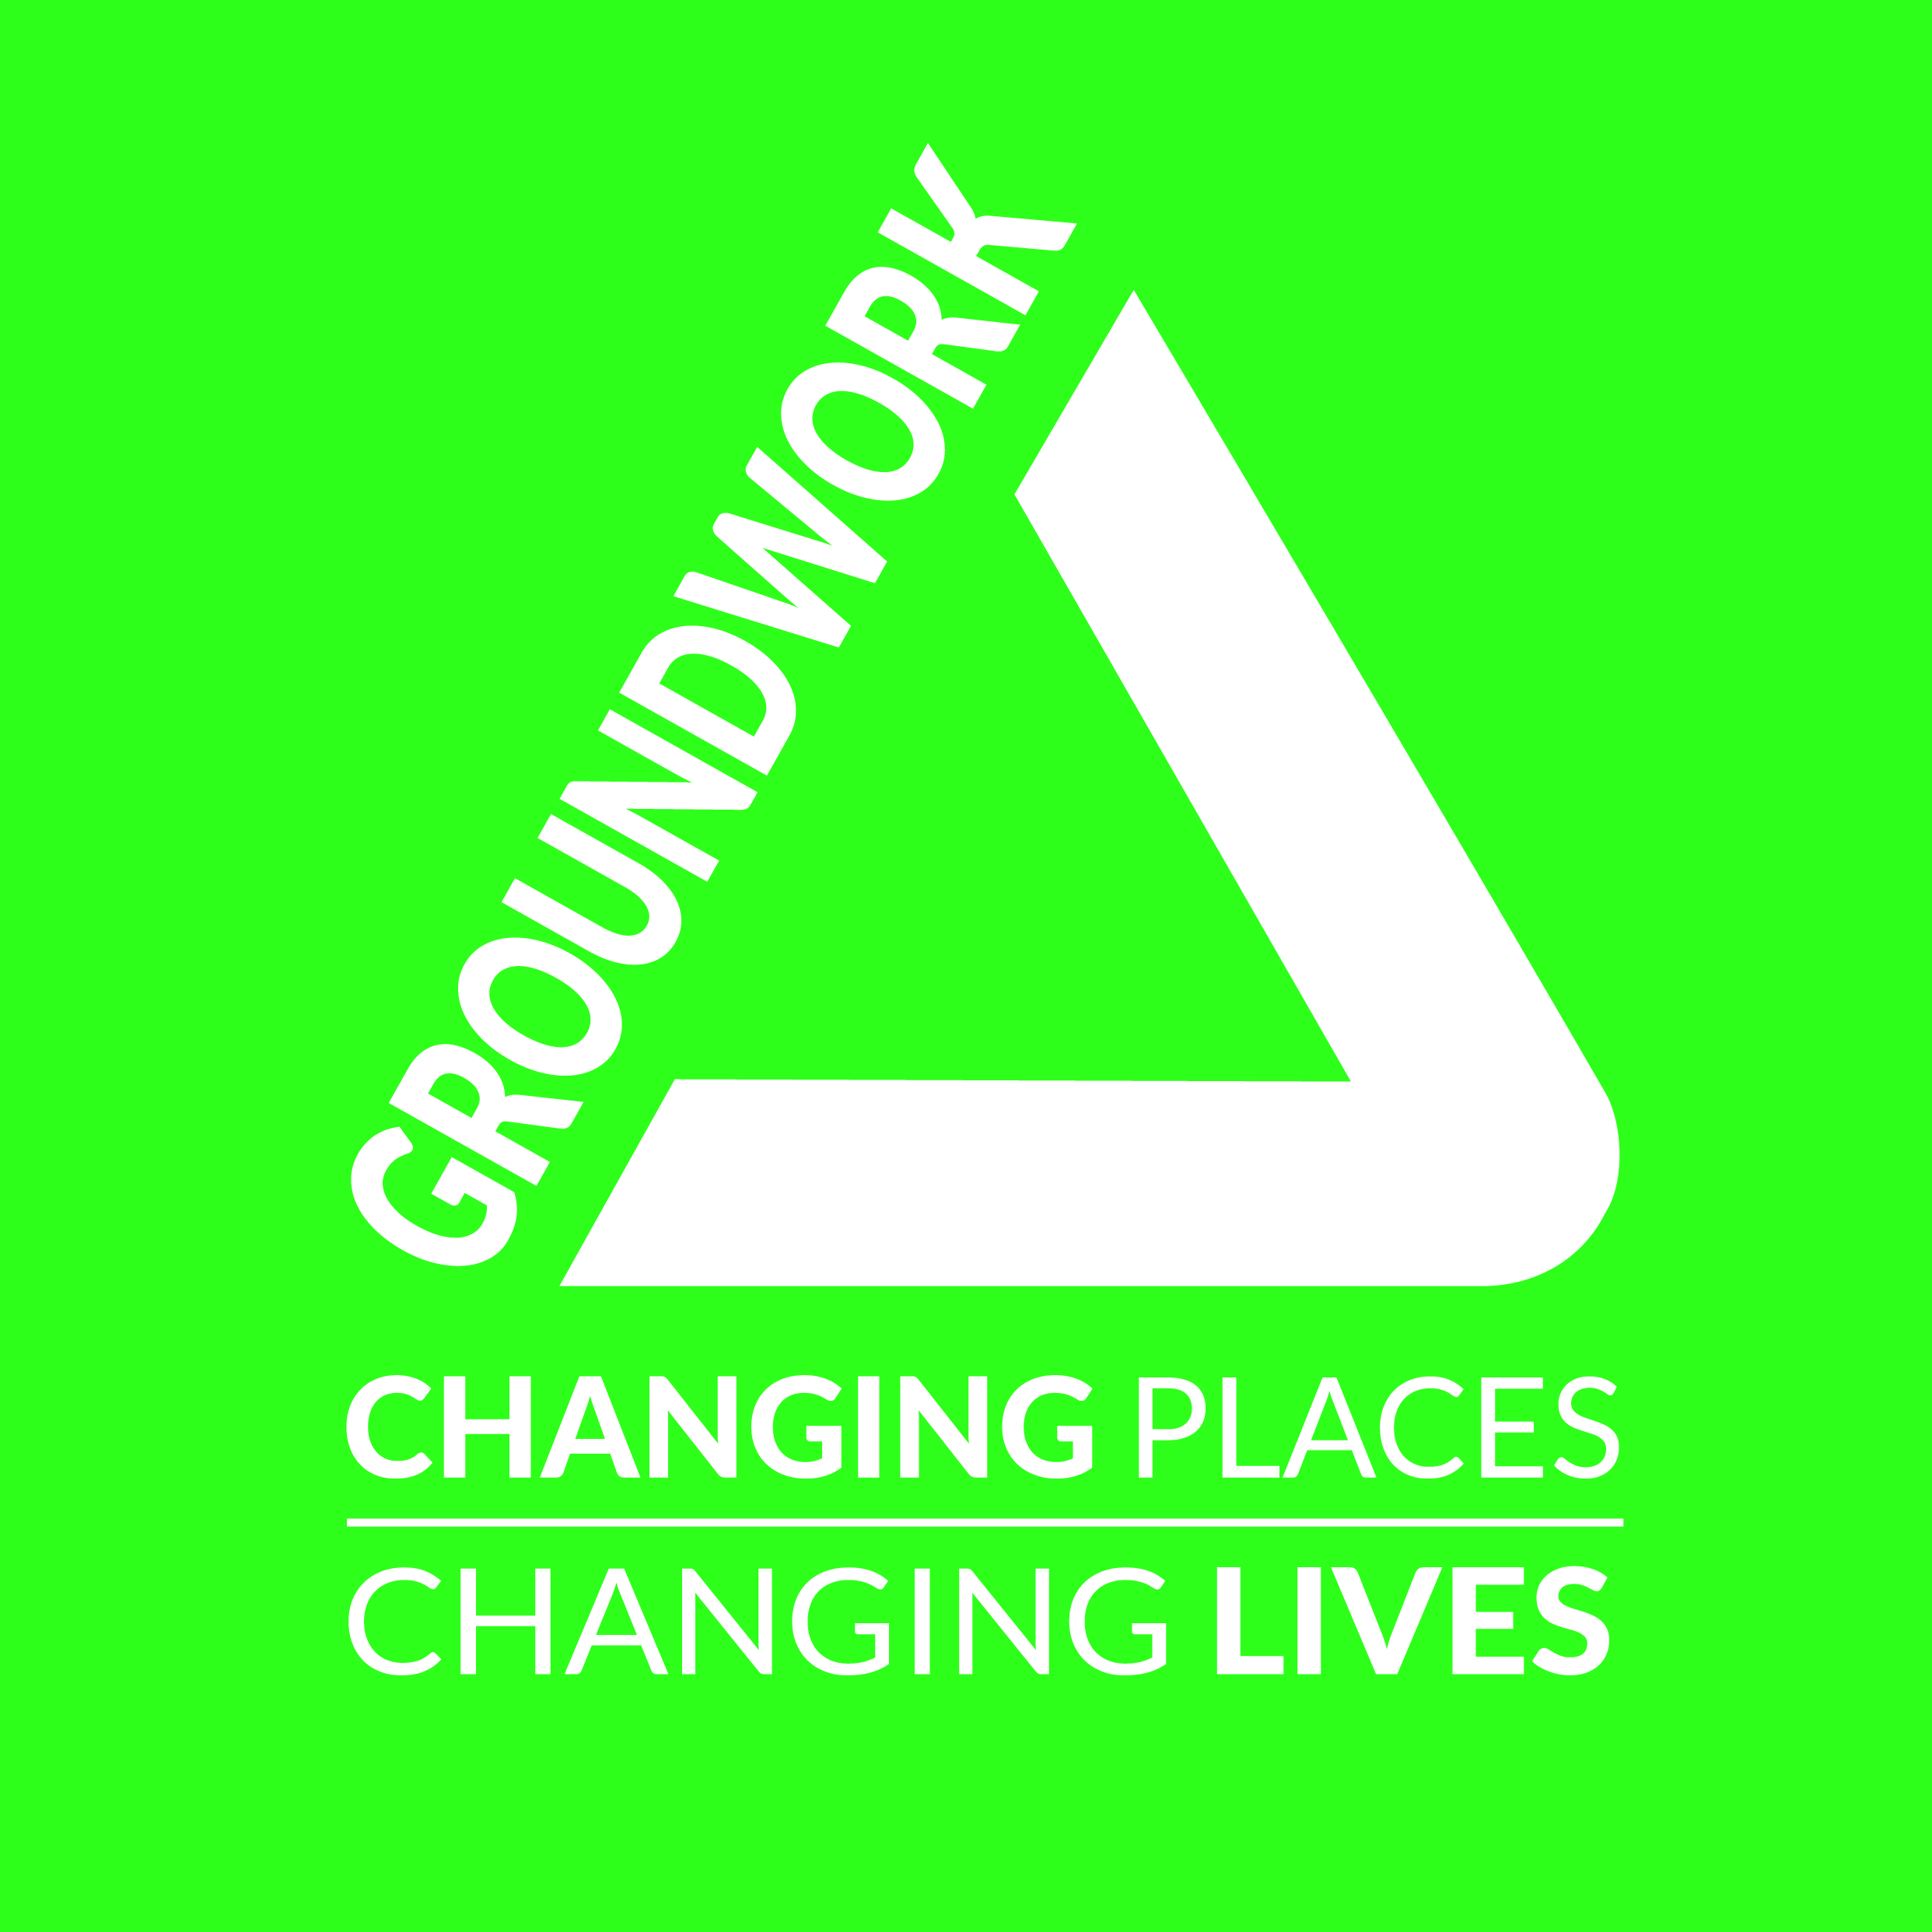 Groundwork North East